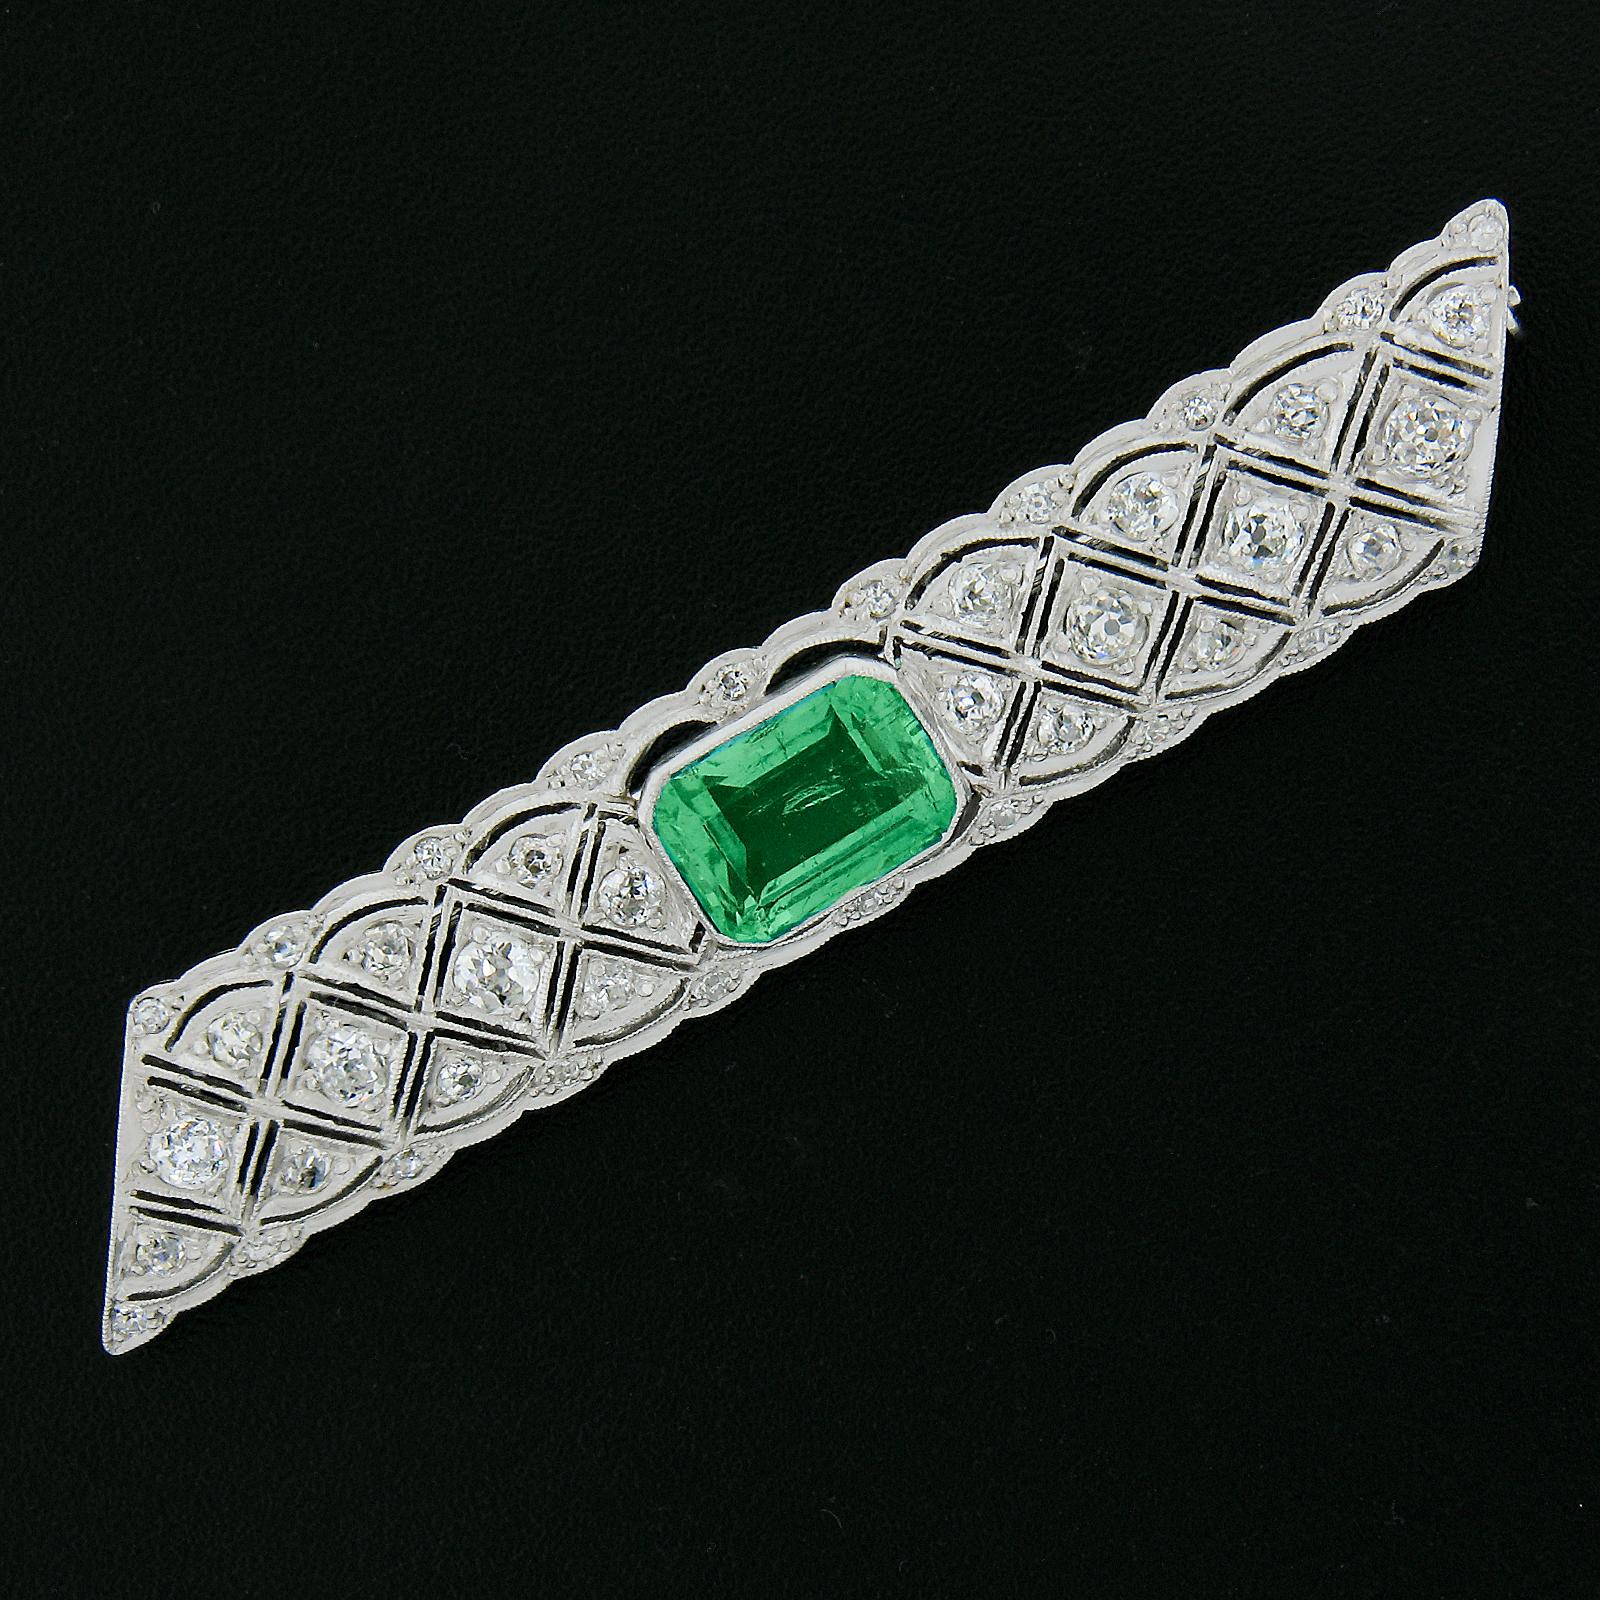 --Stone(s):--
(1) Natural Genuine Emerald - Minor Oil - Elongated Cut - Milgrain Bezel Set - Bright Vibrant Green Color - 2.40ct (approx. based on certifiaction) ** See Certification Details Below for Complete Info **
(41) Natural Genuine Diamonds -